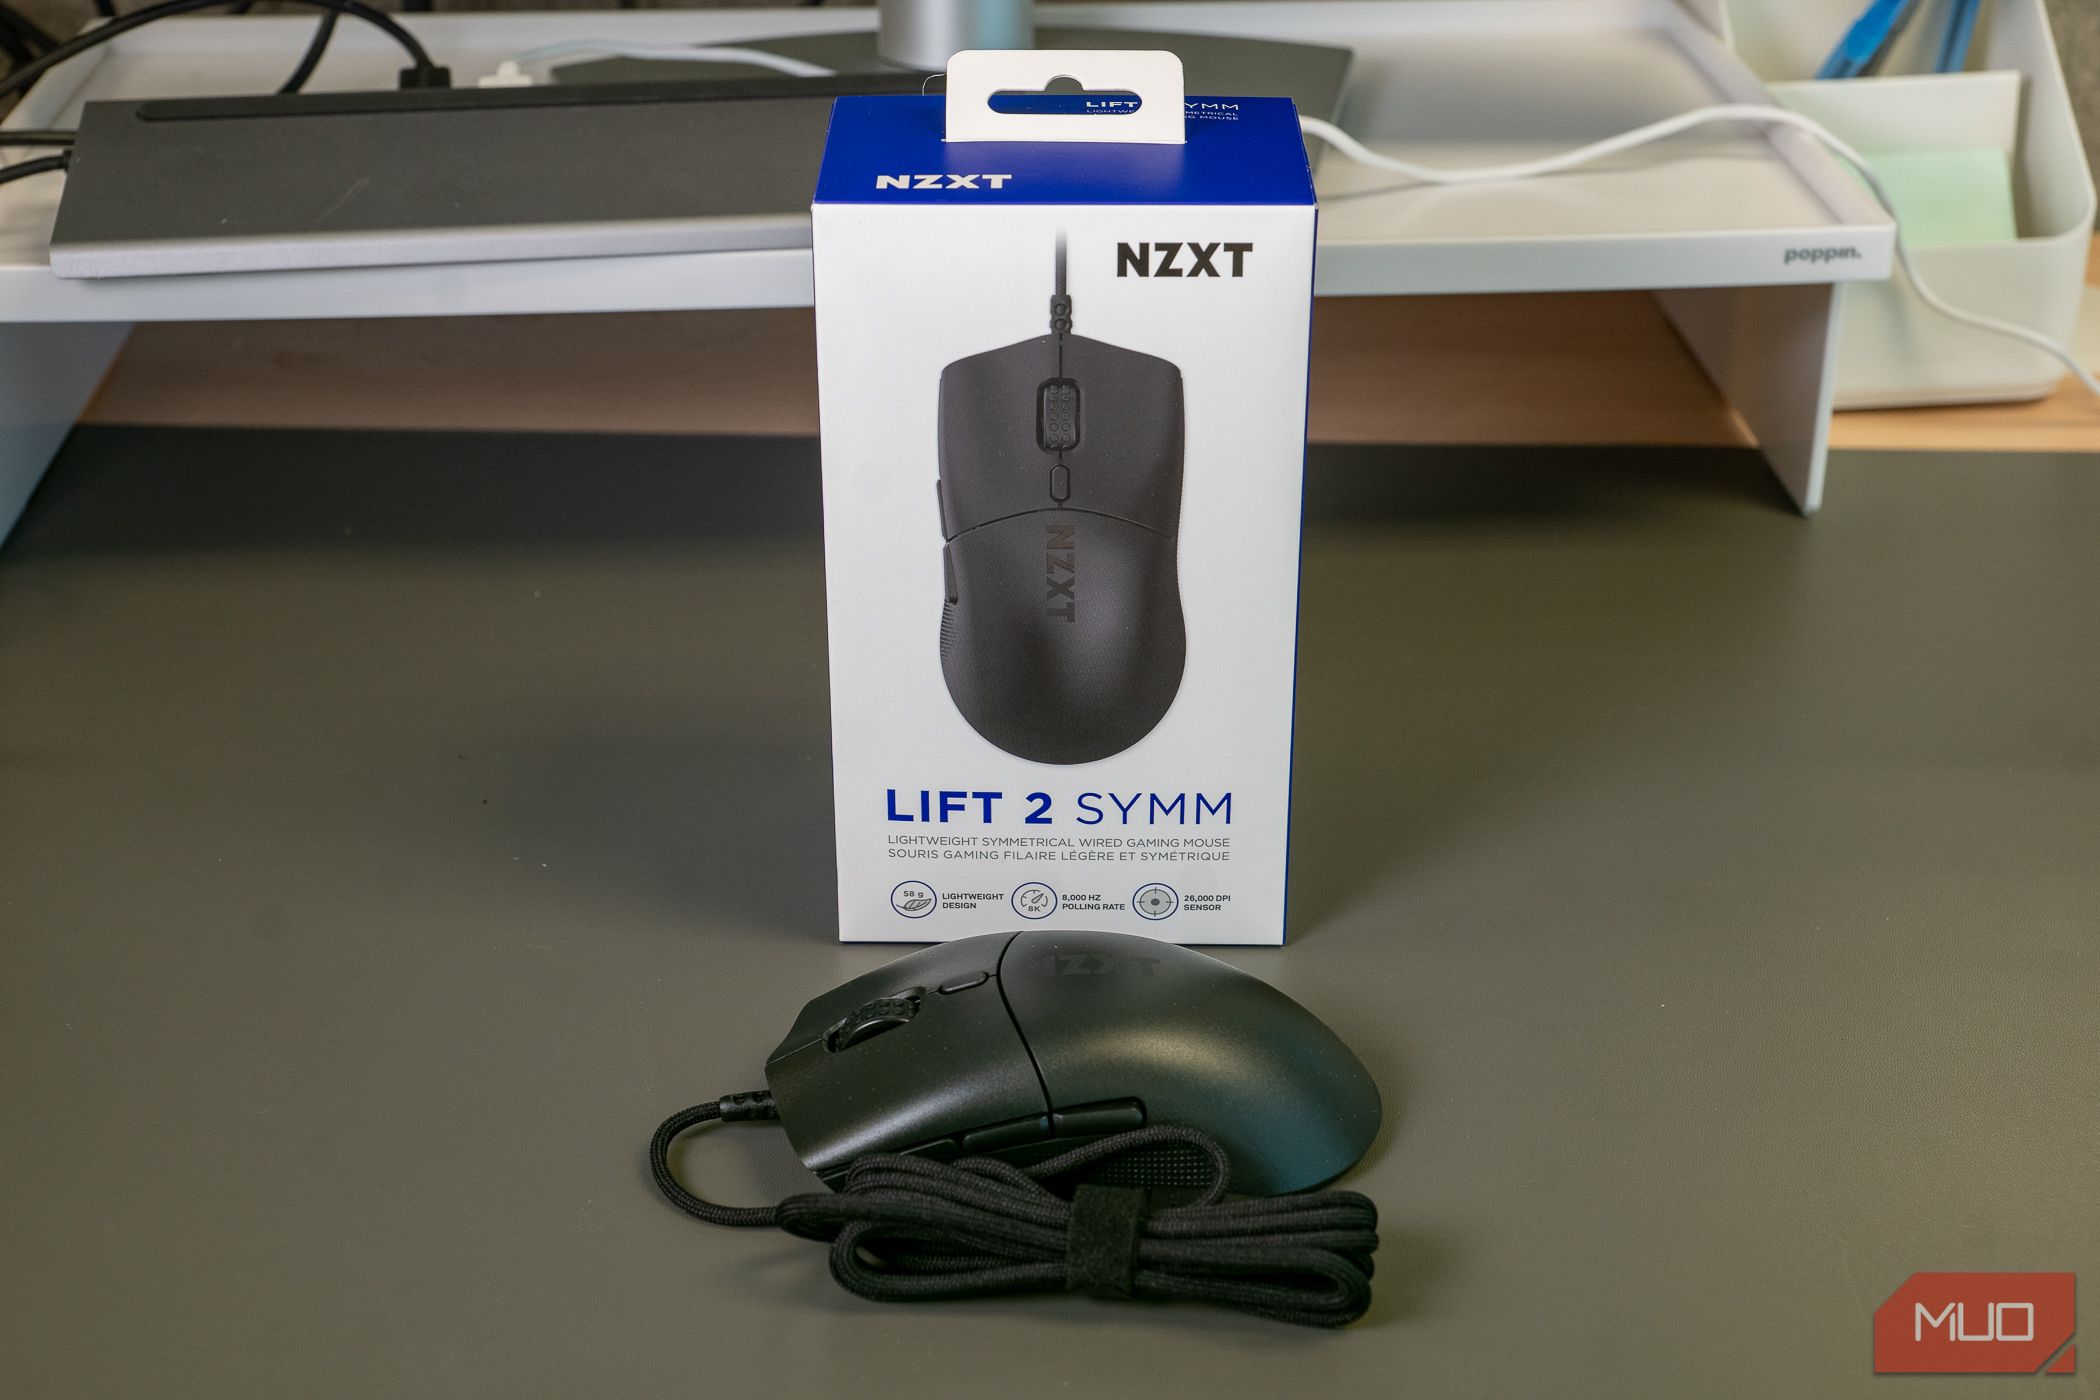 NZXT Lift 2 Symm mouse in front of box